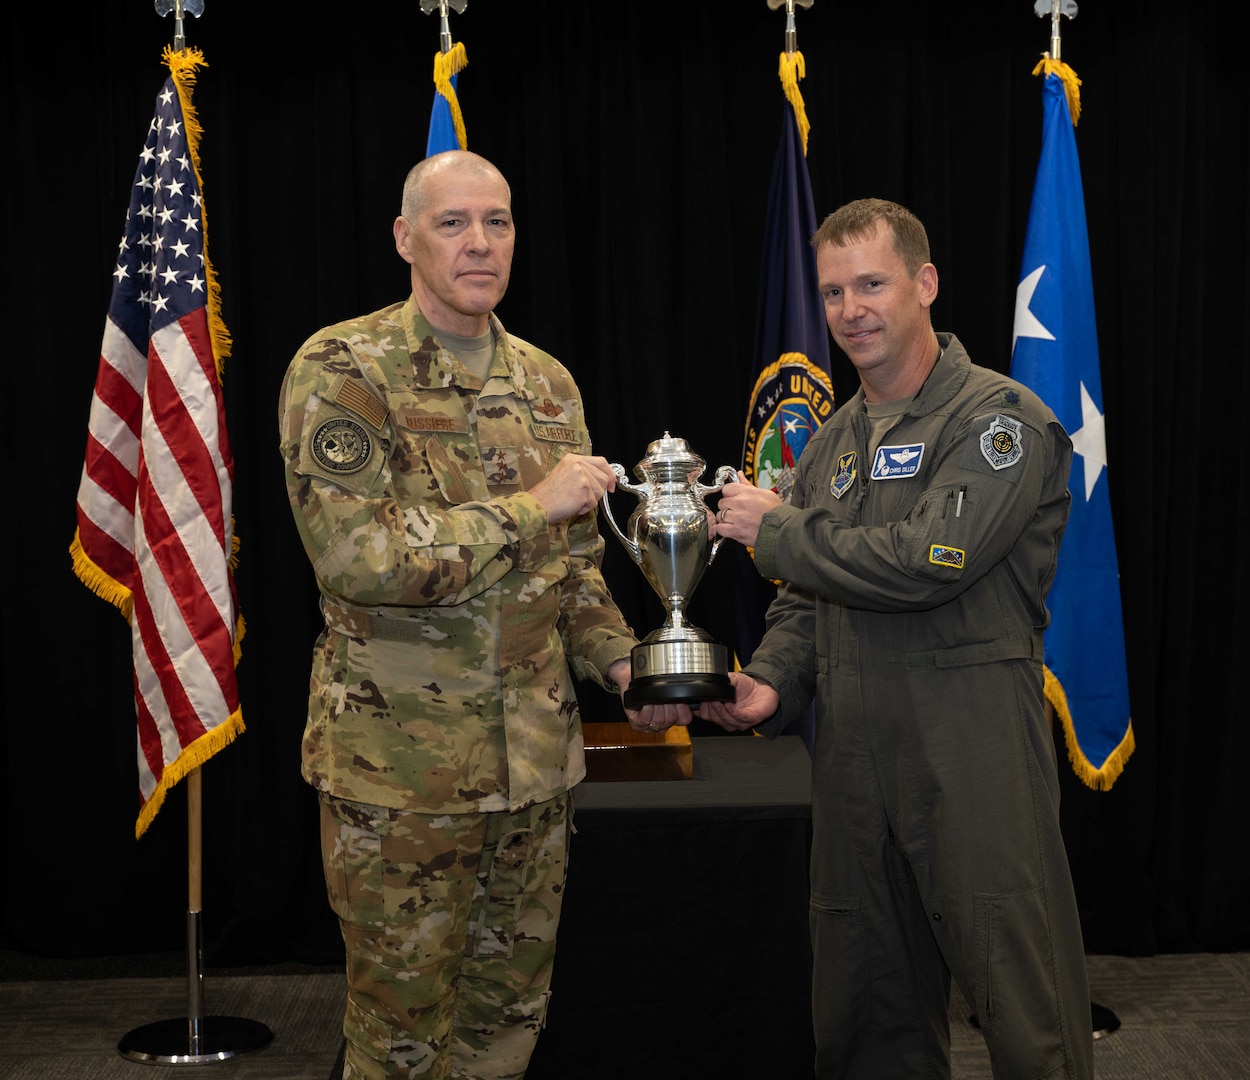 U.S. Air Force Lt. Gen. Thomas Bussiere, United States Strategic Command deputy commander, presents the Omaha Trophy to the 509th Operations Support Squadron for excellence in strategic bomber execution Aug. 4, 2022, on Whiteman Air Force Base, Mo. The Omaha Trophy is an annual award given to the best units in four different categories across the United States Strategic Command. (U.S. Air Force photo by Airman 1st Class Bryson Britt)